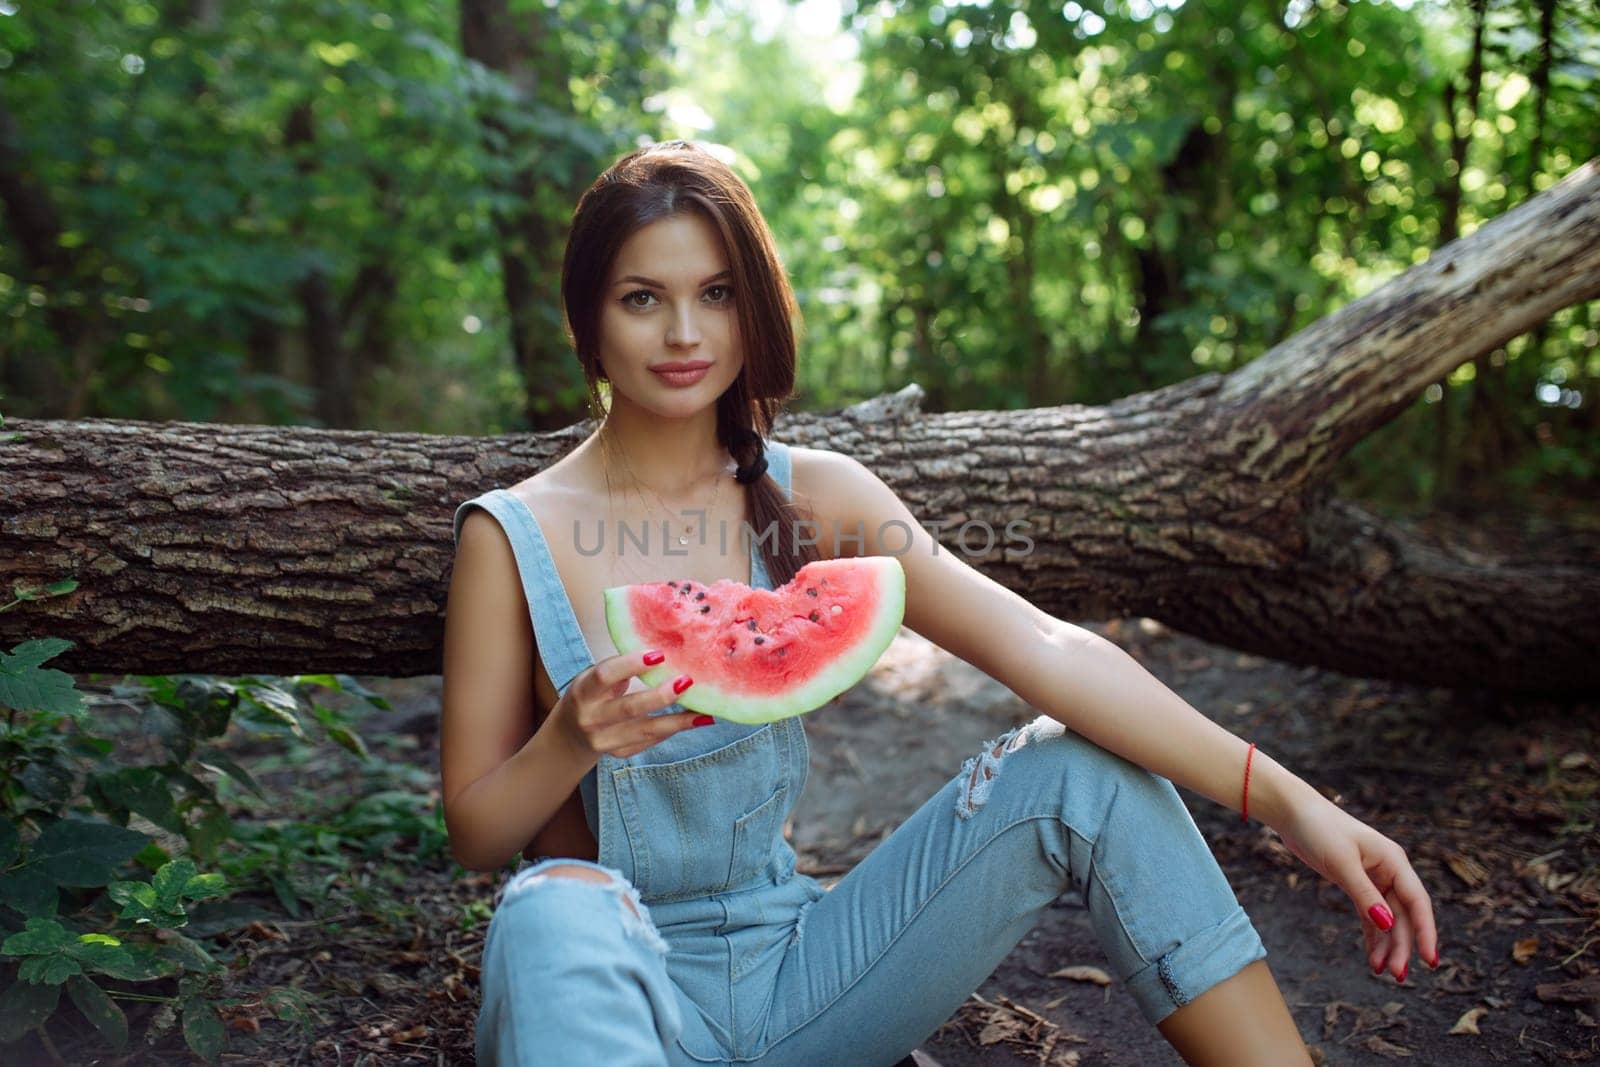 Picnic in nature and healthy eating. A sexy girl in the woods eats watermelon. Portrait of a woman with a berry in her hands.